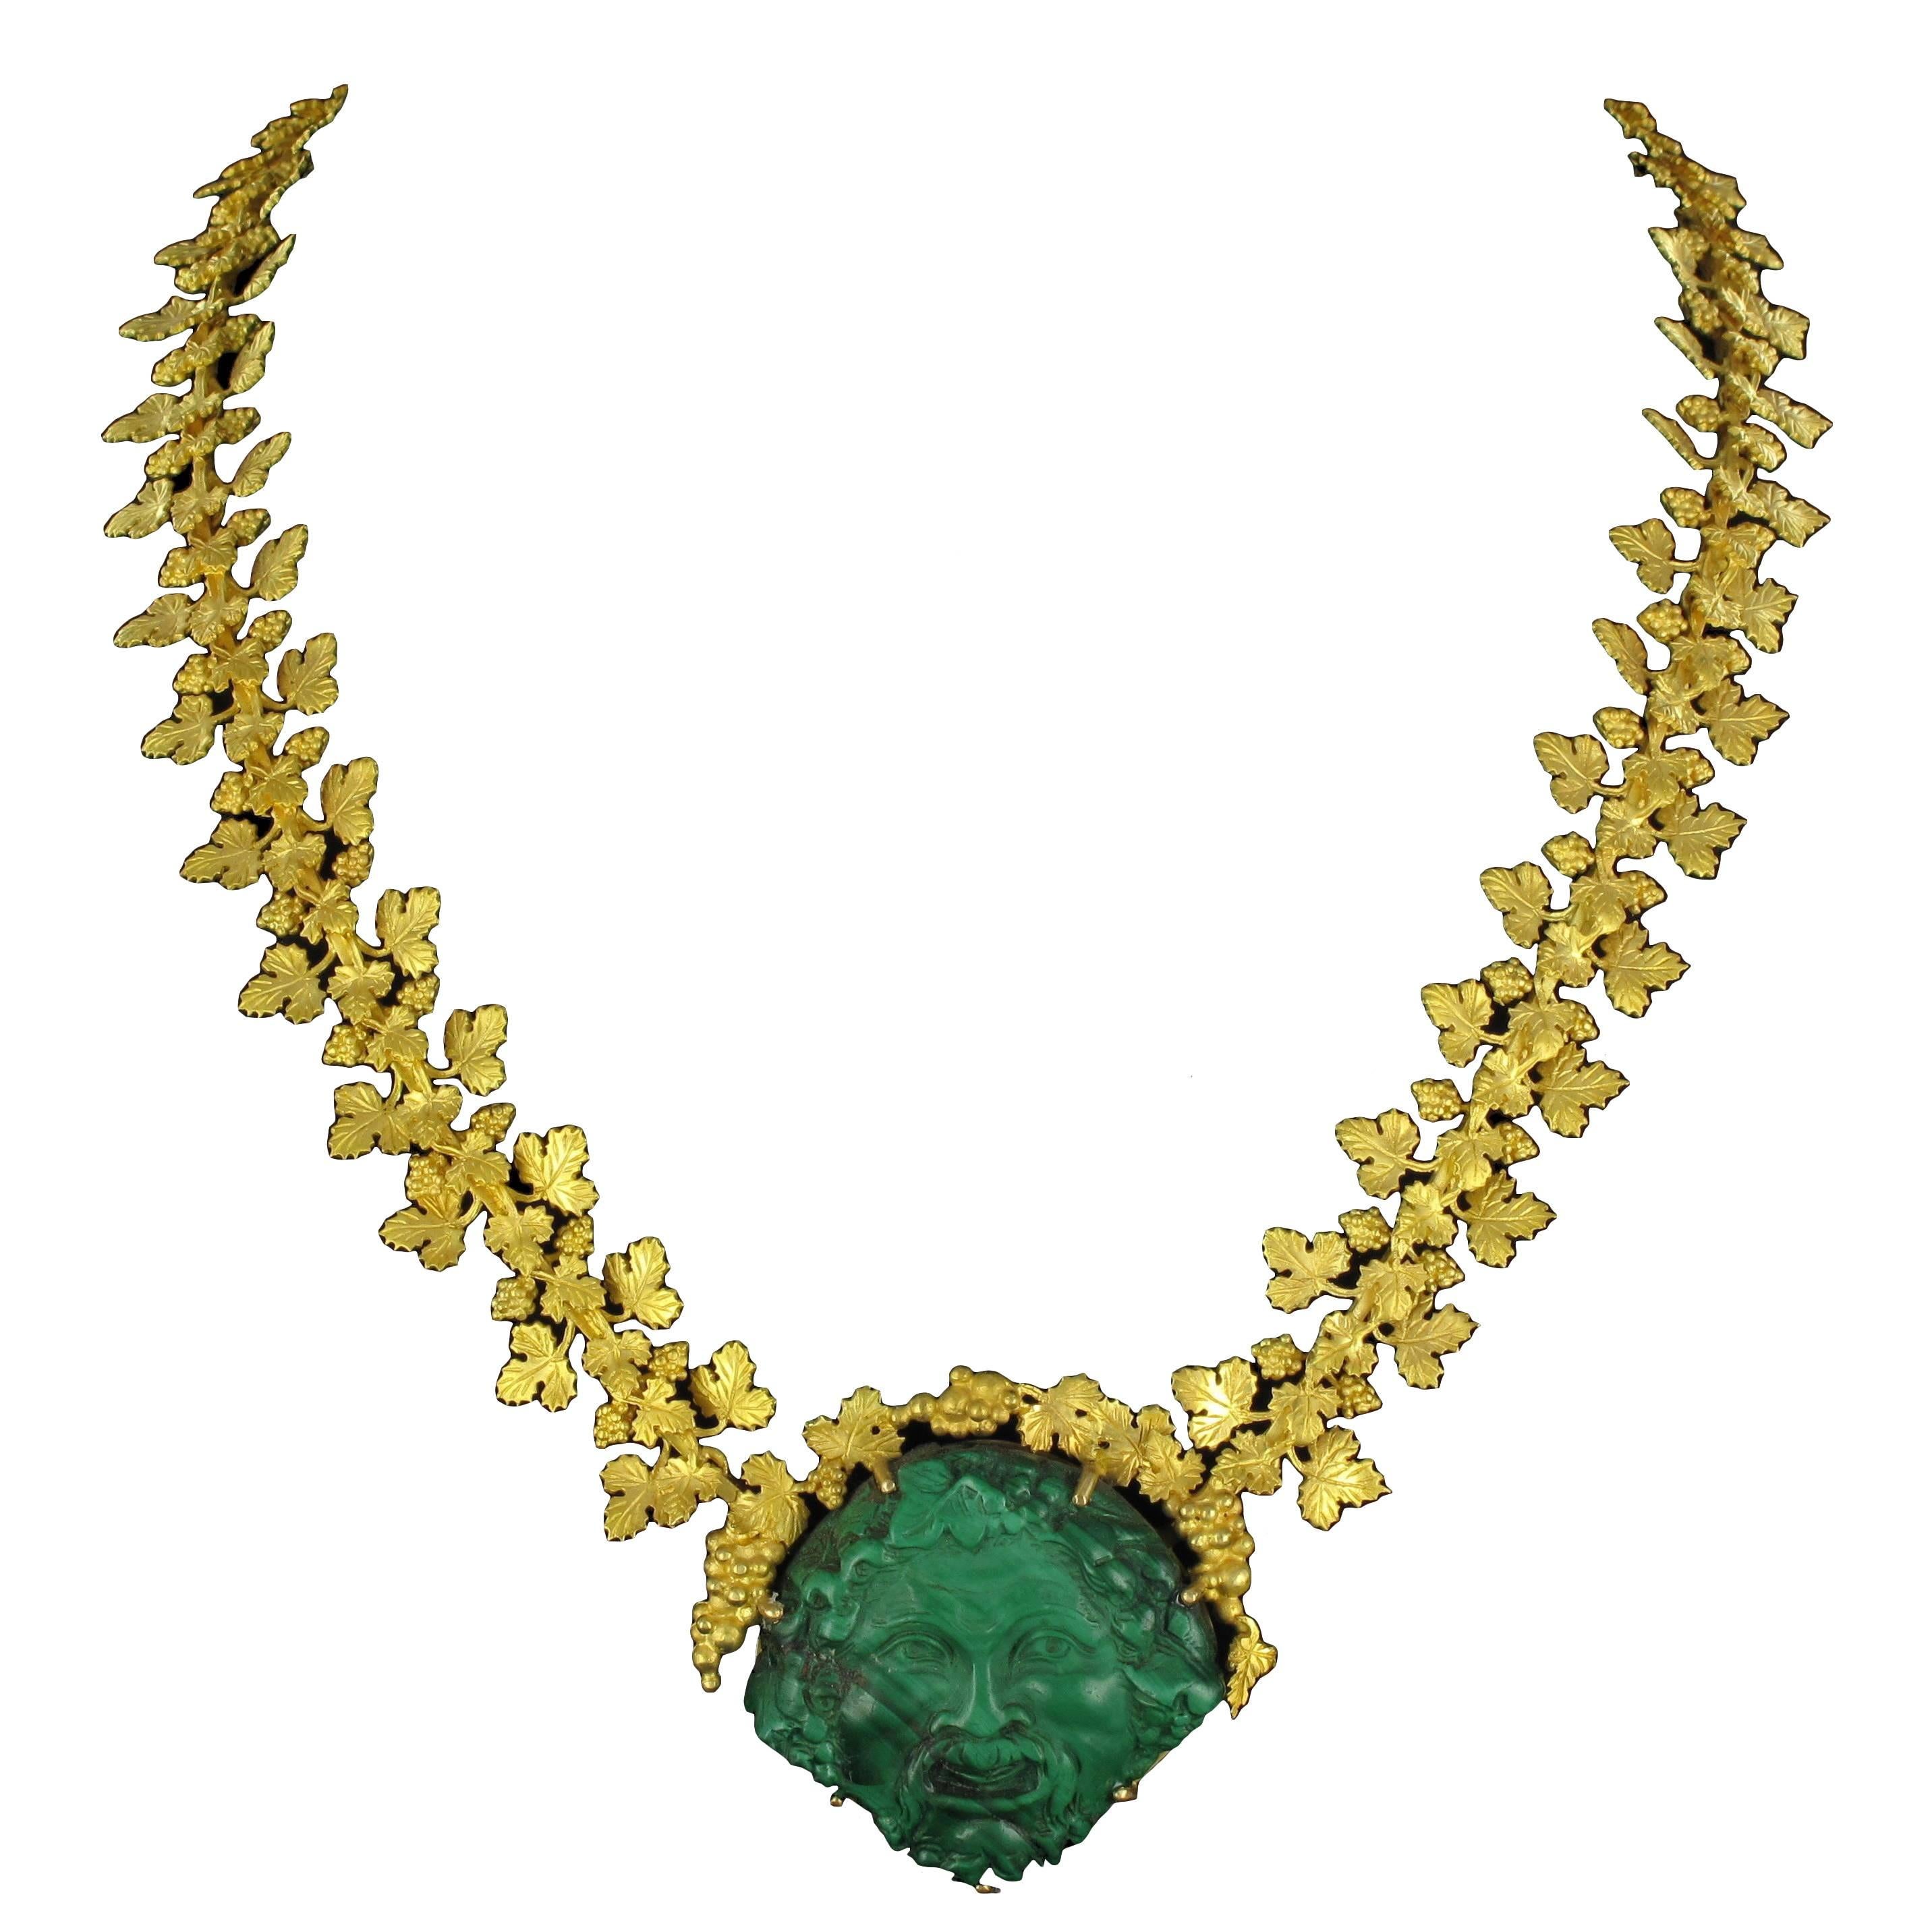 Necklace in 18K matt yellow gold necklace, eagle head hallmark.
Consisting of golden vine leaves and bunches of grapes hinged together, the centrepiece of this unusual necklace is a malachite cameo of a grinning ‘Bacchus’. The clasp is a rectangular